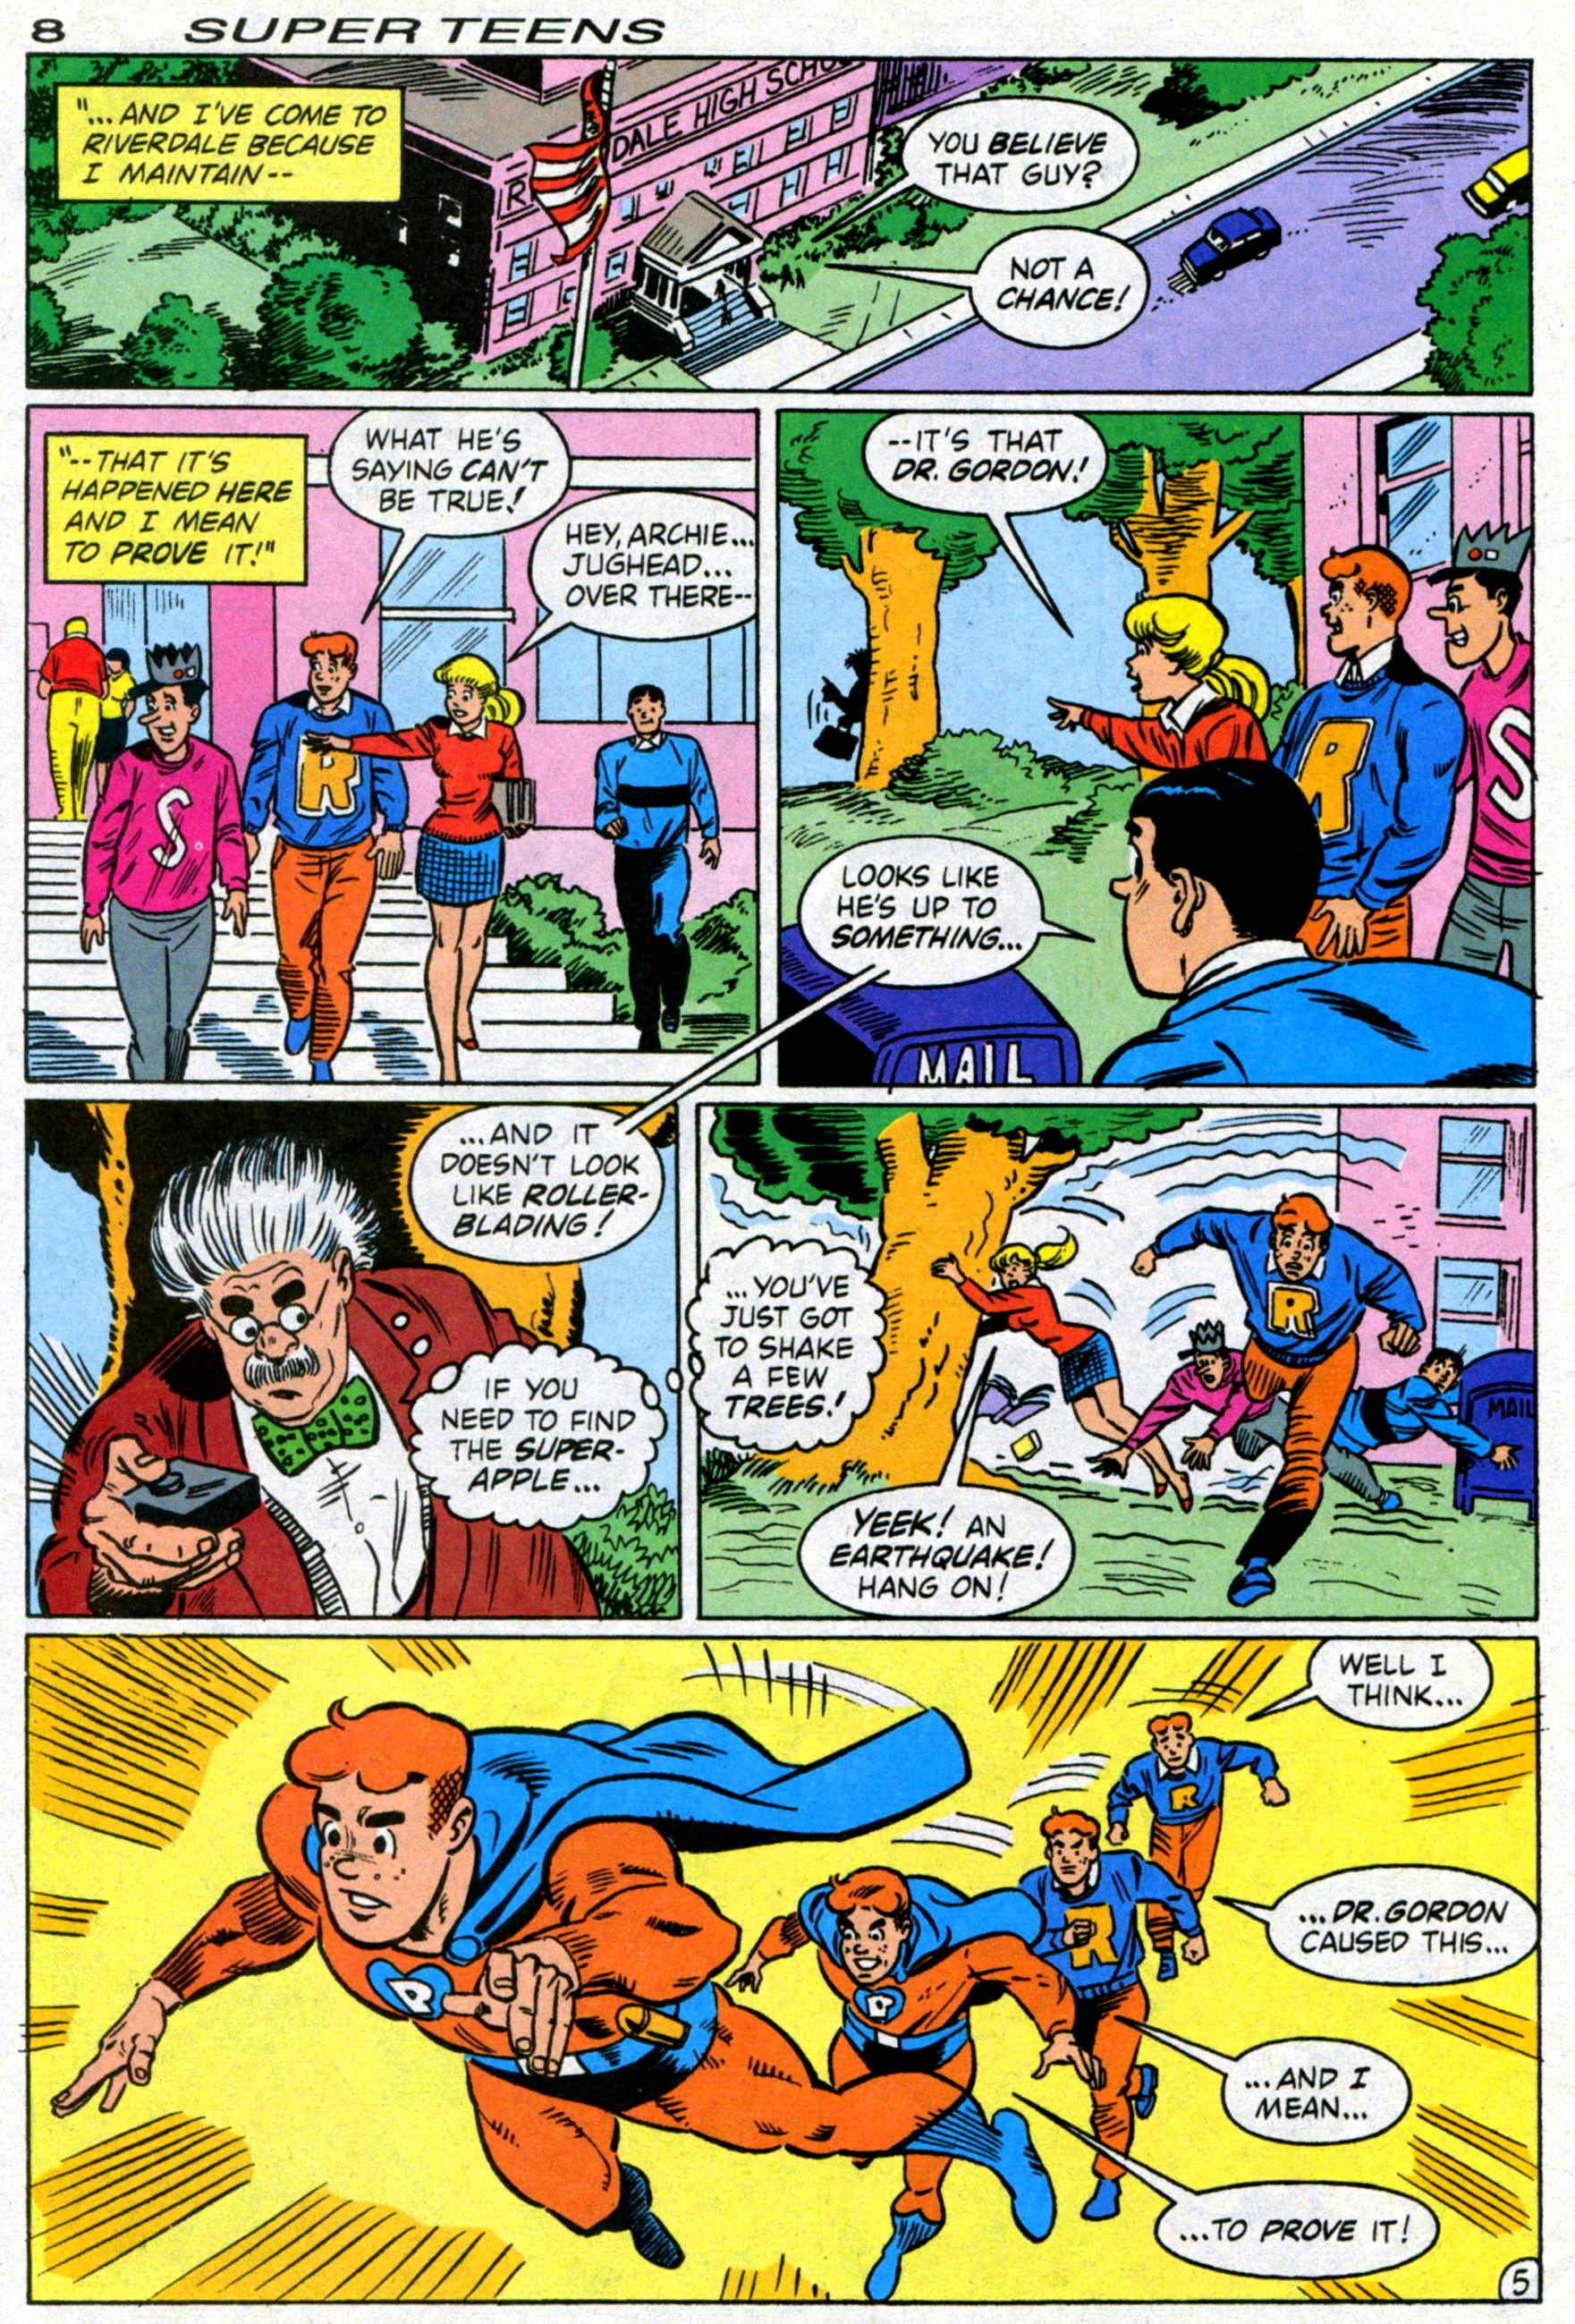 Read online Archie's Super Teens comic -  Issue #1 - 10